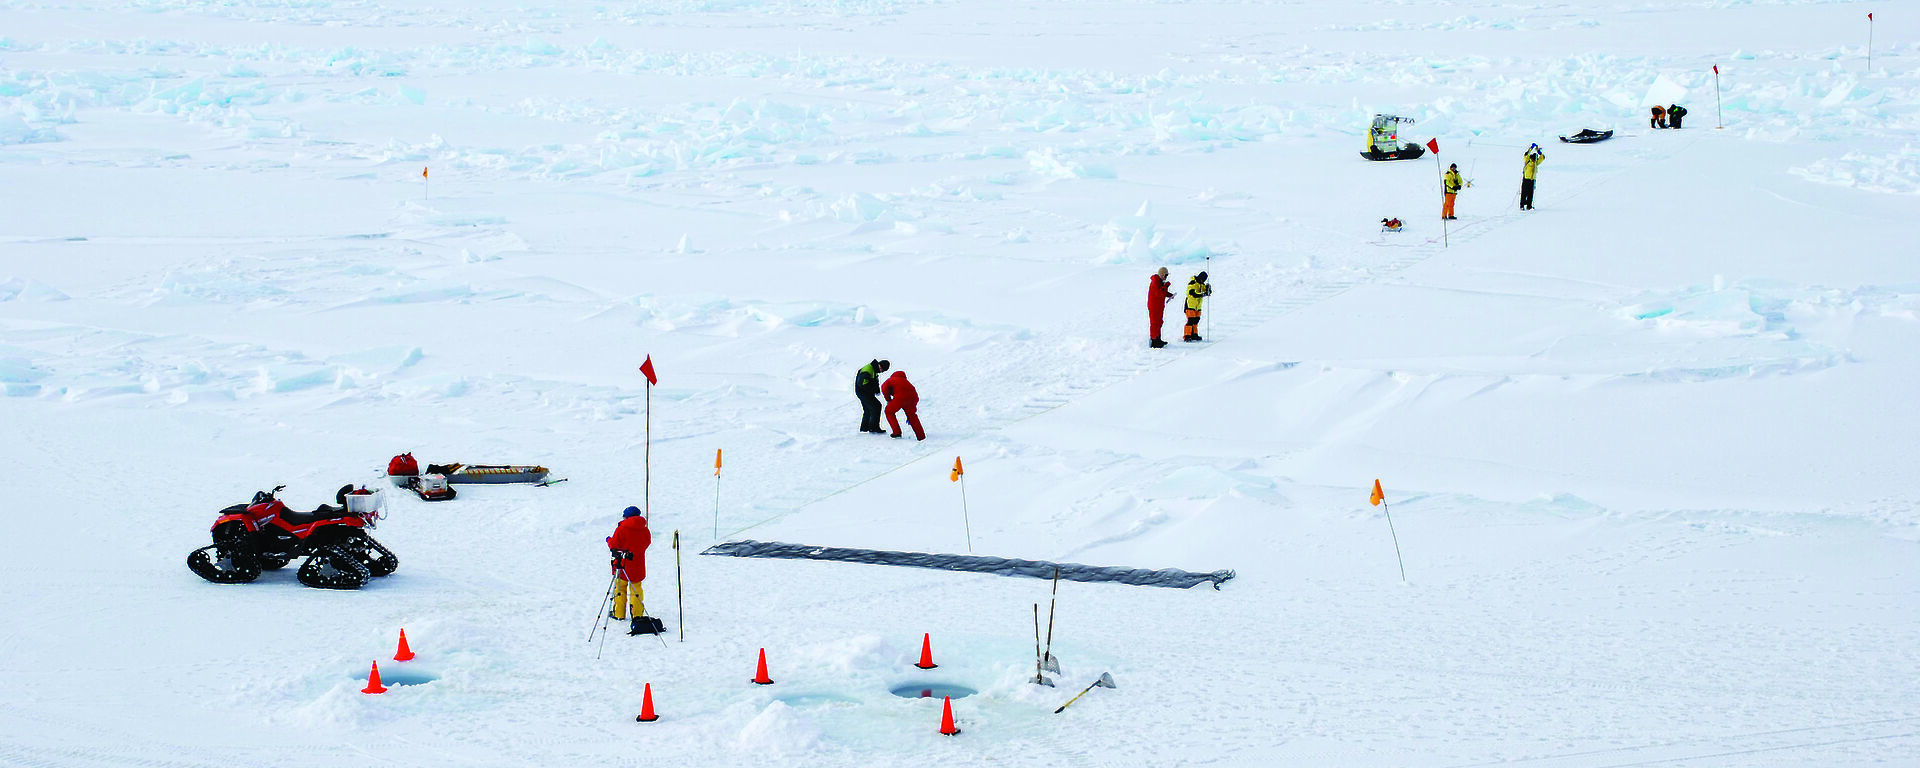 A small team of scientists put flags out on the sea ice to establish a 200m transect for scientific studies